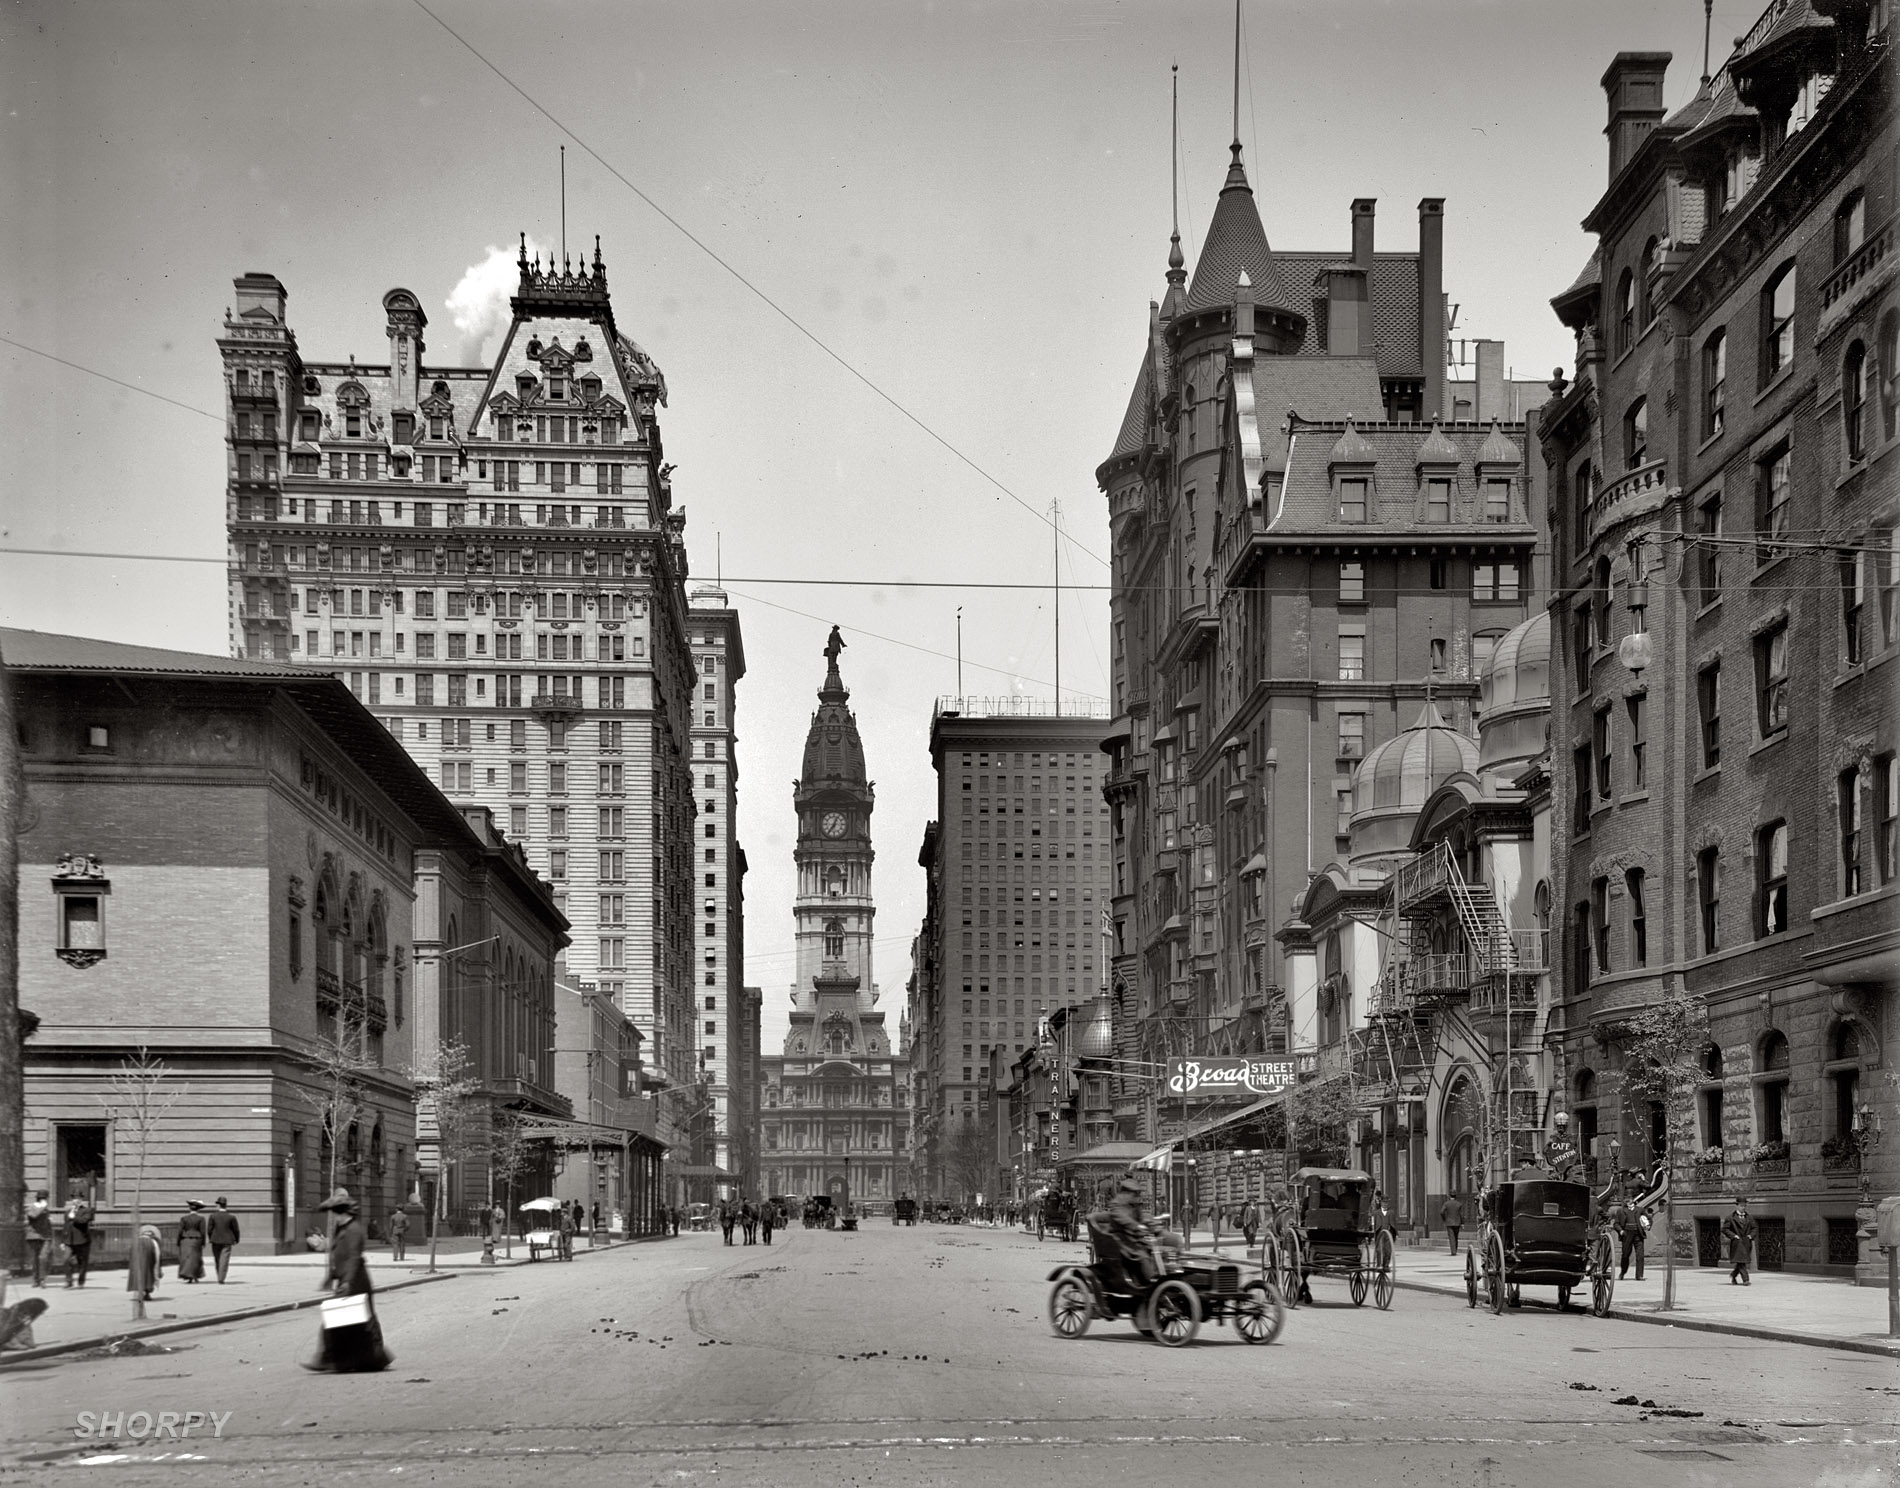 Philadelphia circa 1905. "Broad Street north from Spruce." Detroit Publishing Company, 8x10 glass negative. Library of Congress. View full size.